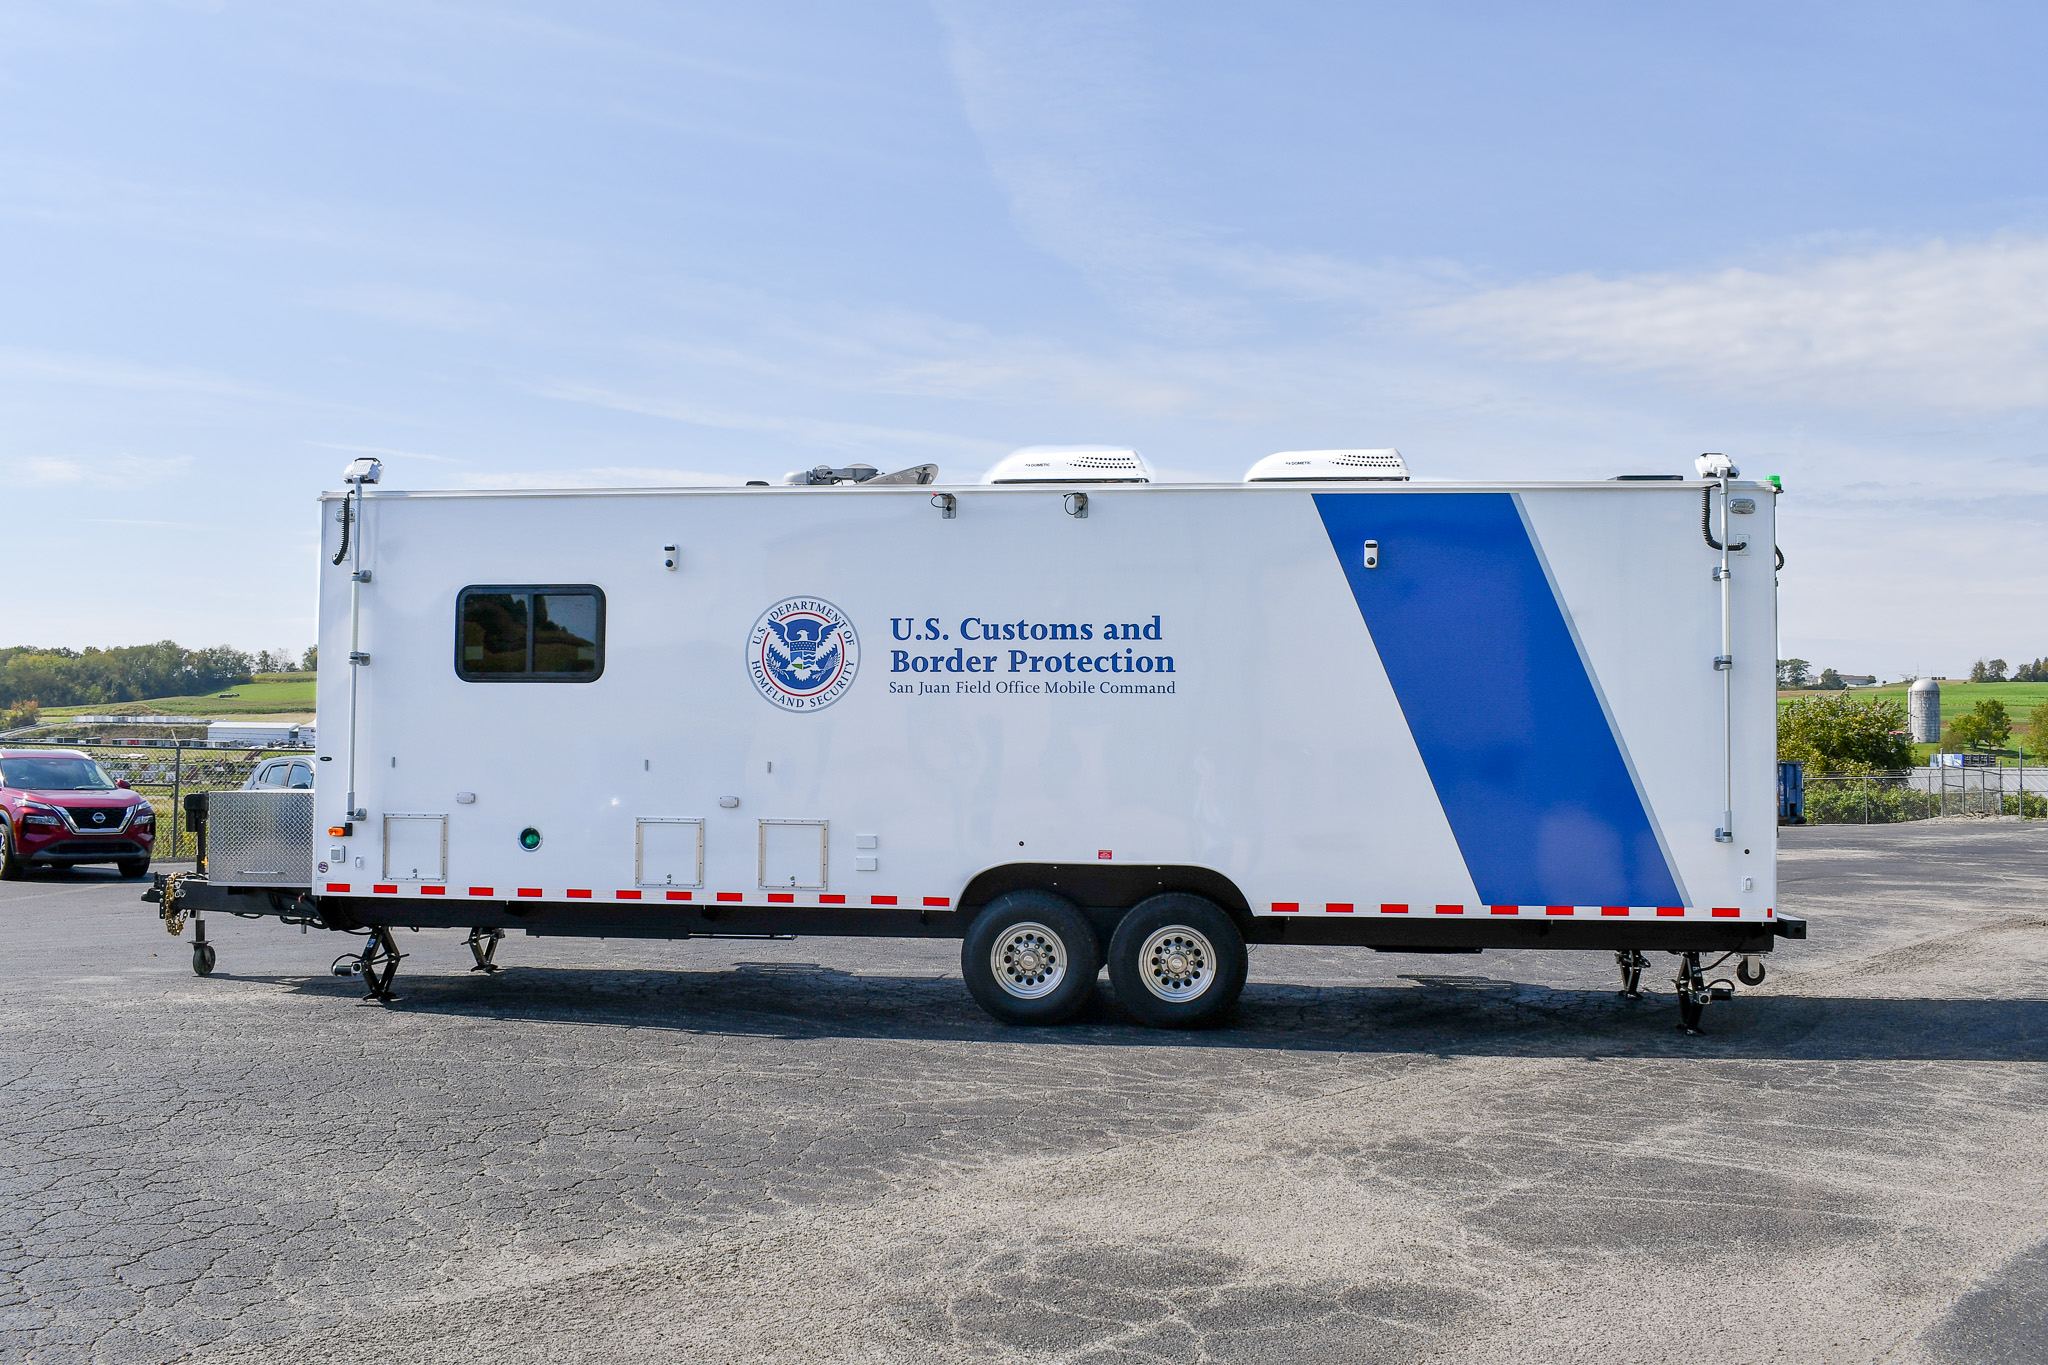 A side view of the unit for Customs and Border Protection in Puerto Rico.